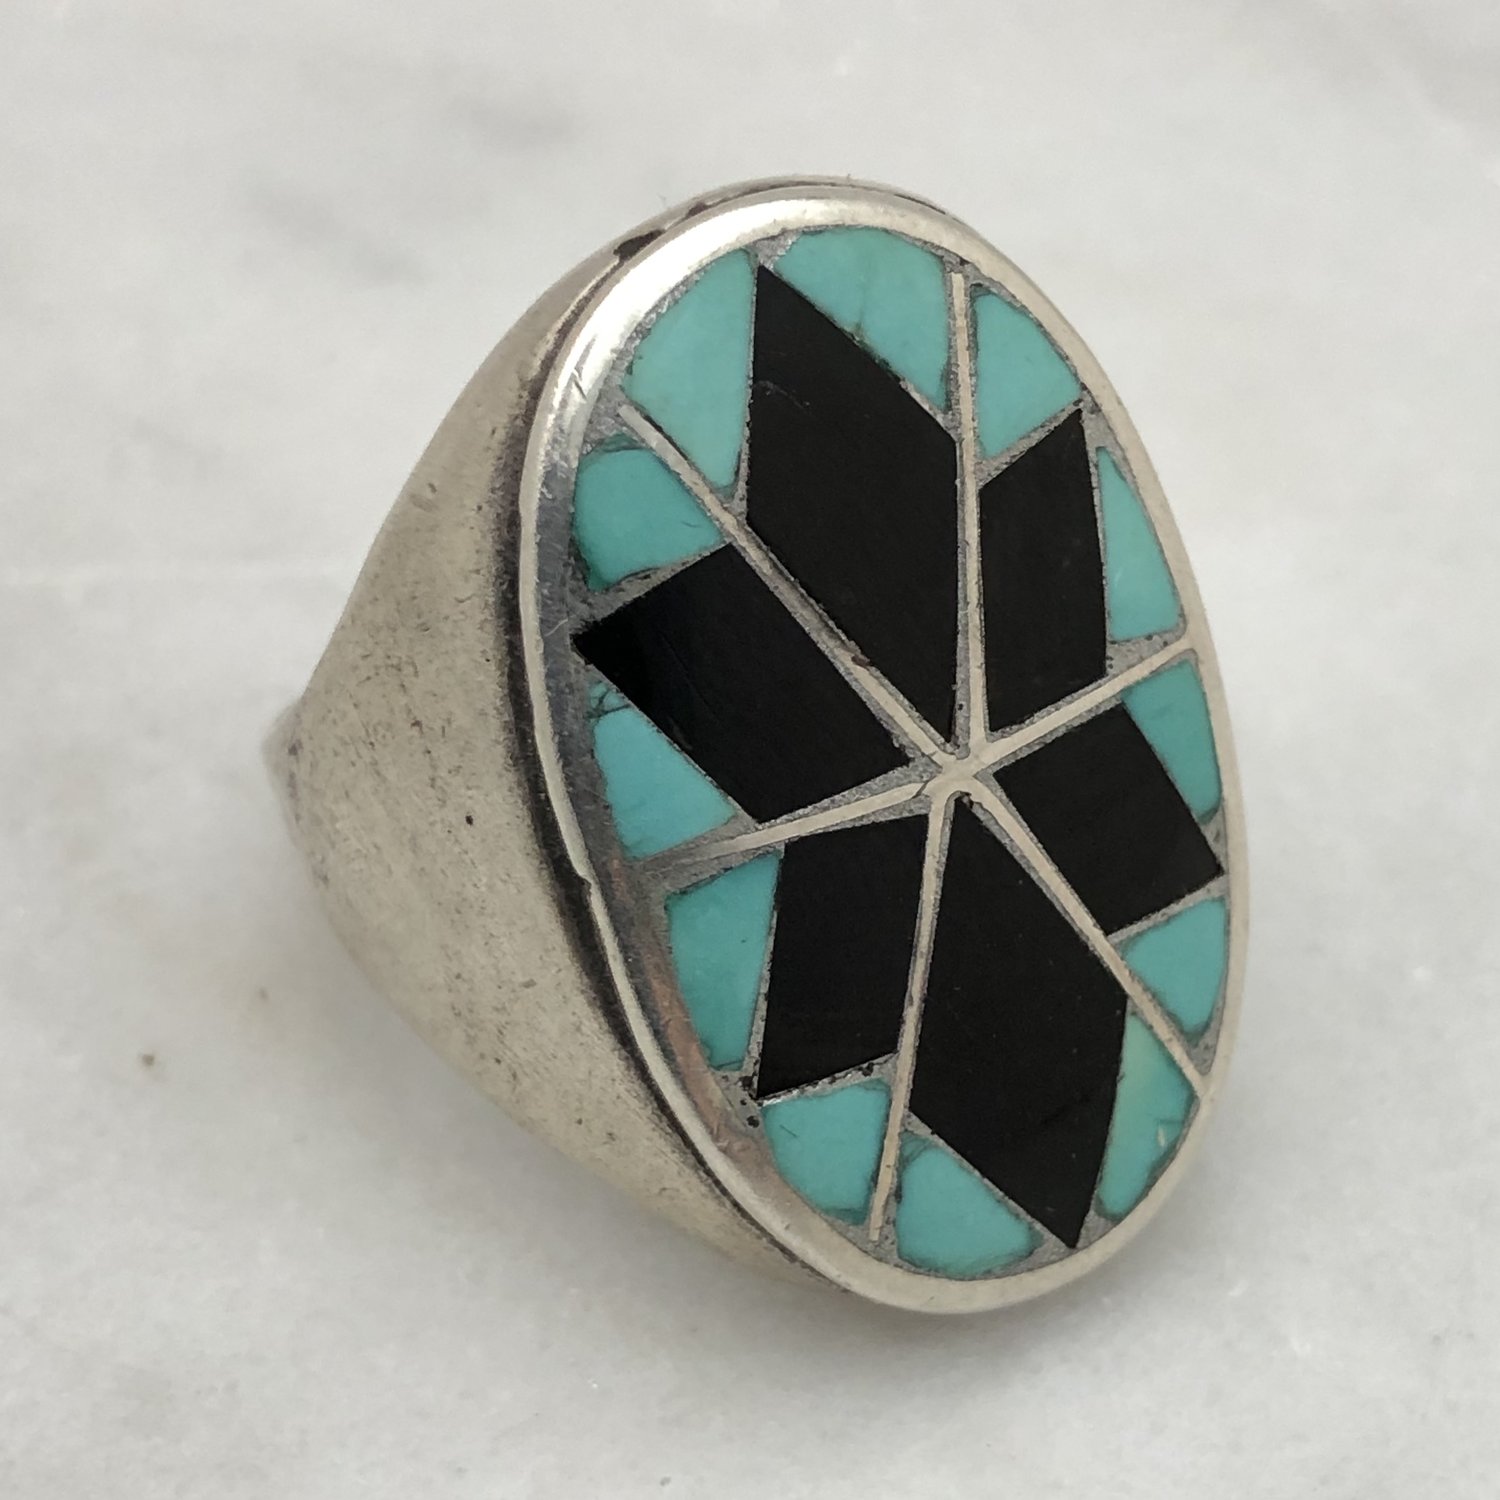 Vintage Zuni Inlaid Silver Turquoise & Black Onyx Star Ring — Worn-Over-Time